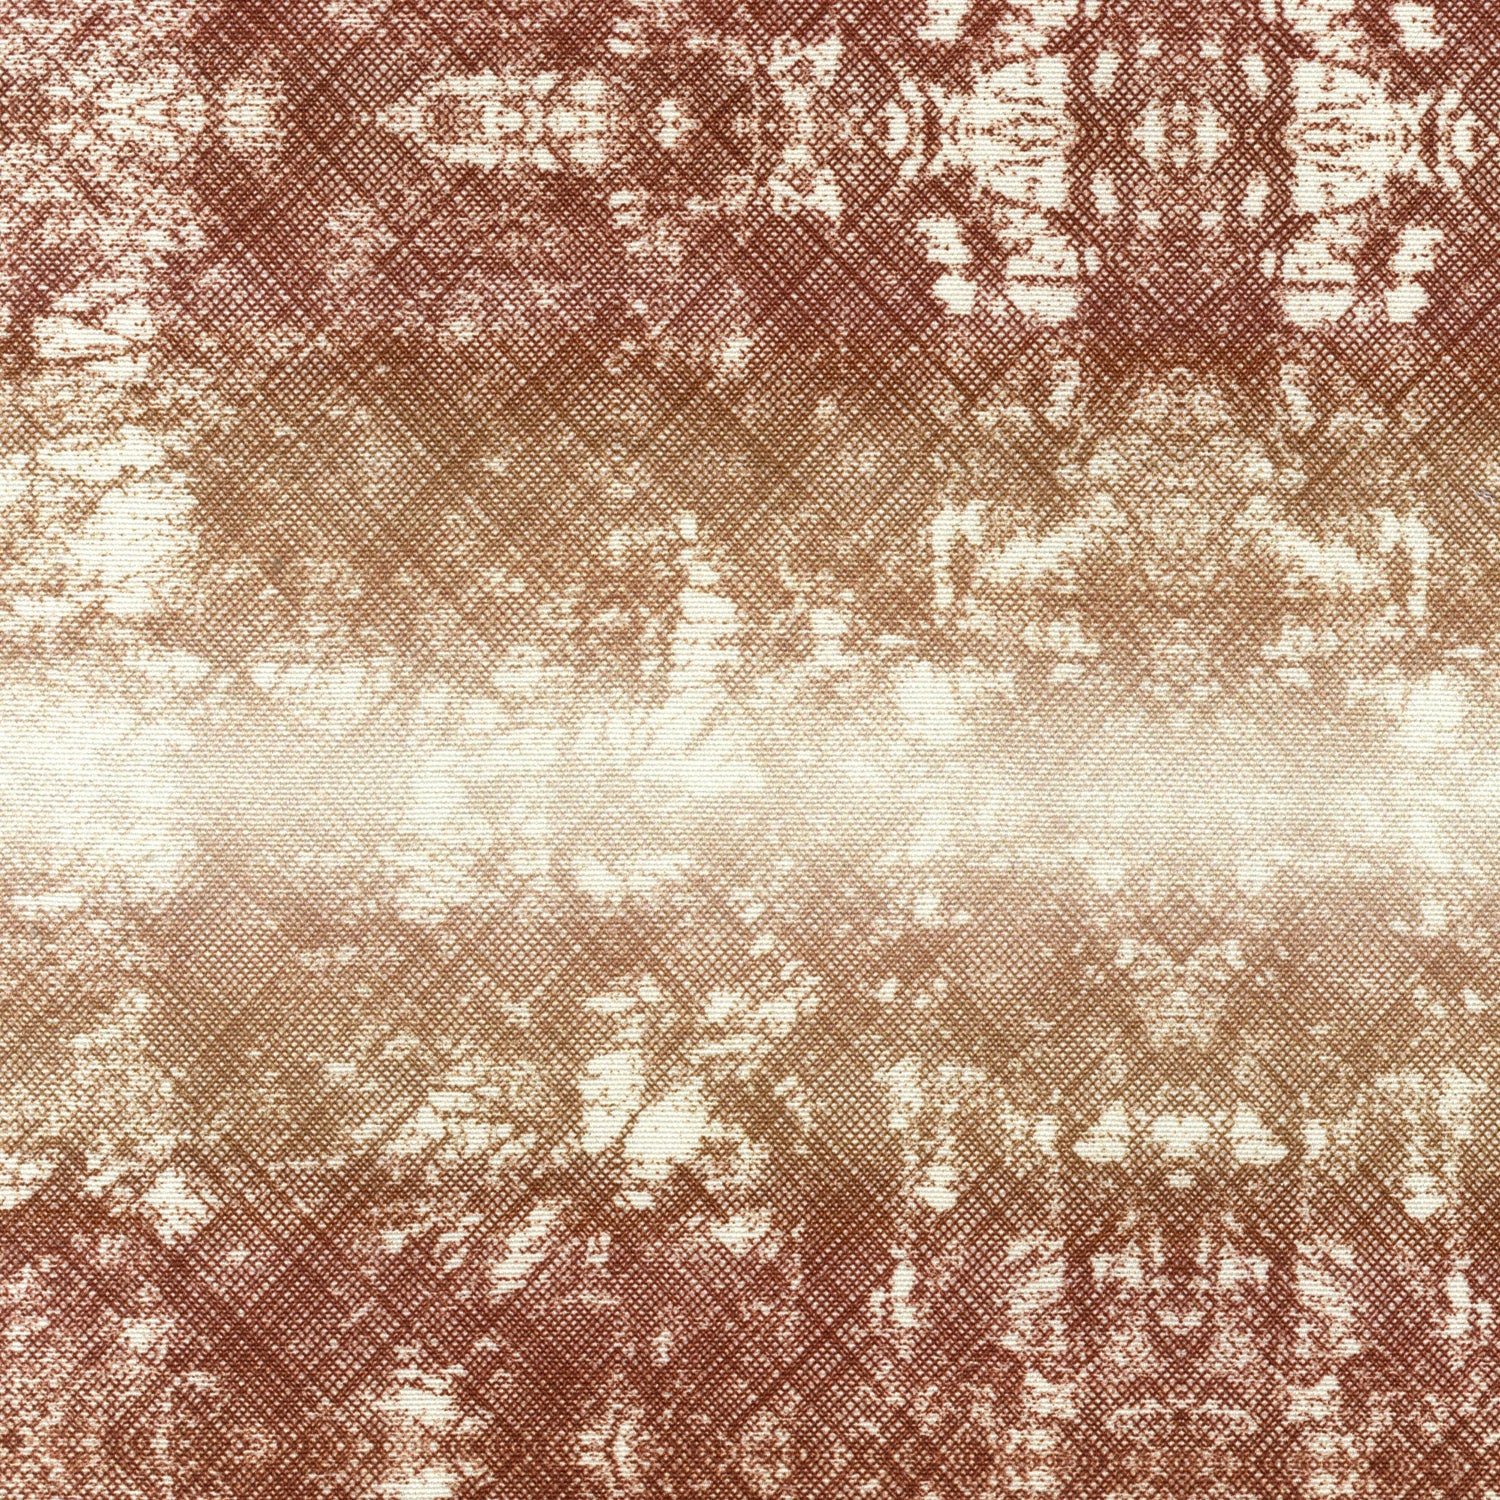 Detail of fabric in a textural ombré print in brown on a cream field.